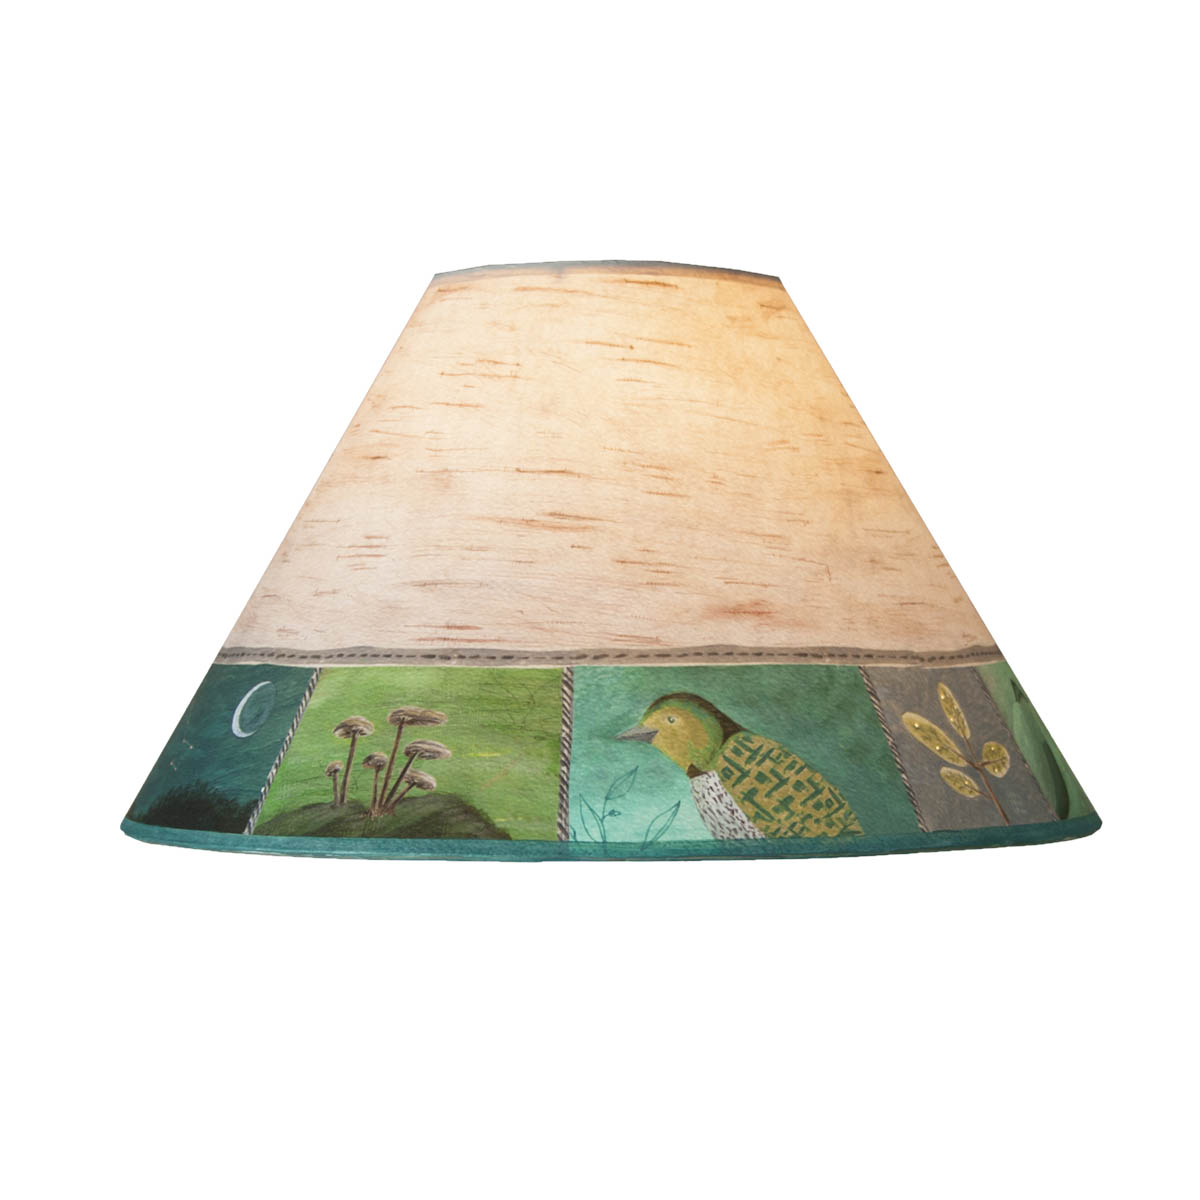 Janna Ugone & Co Lamp Shades Medium Conical Lamp Shade in Woodland Trails in Birch